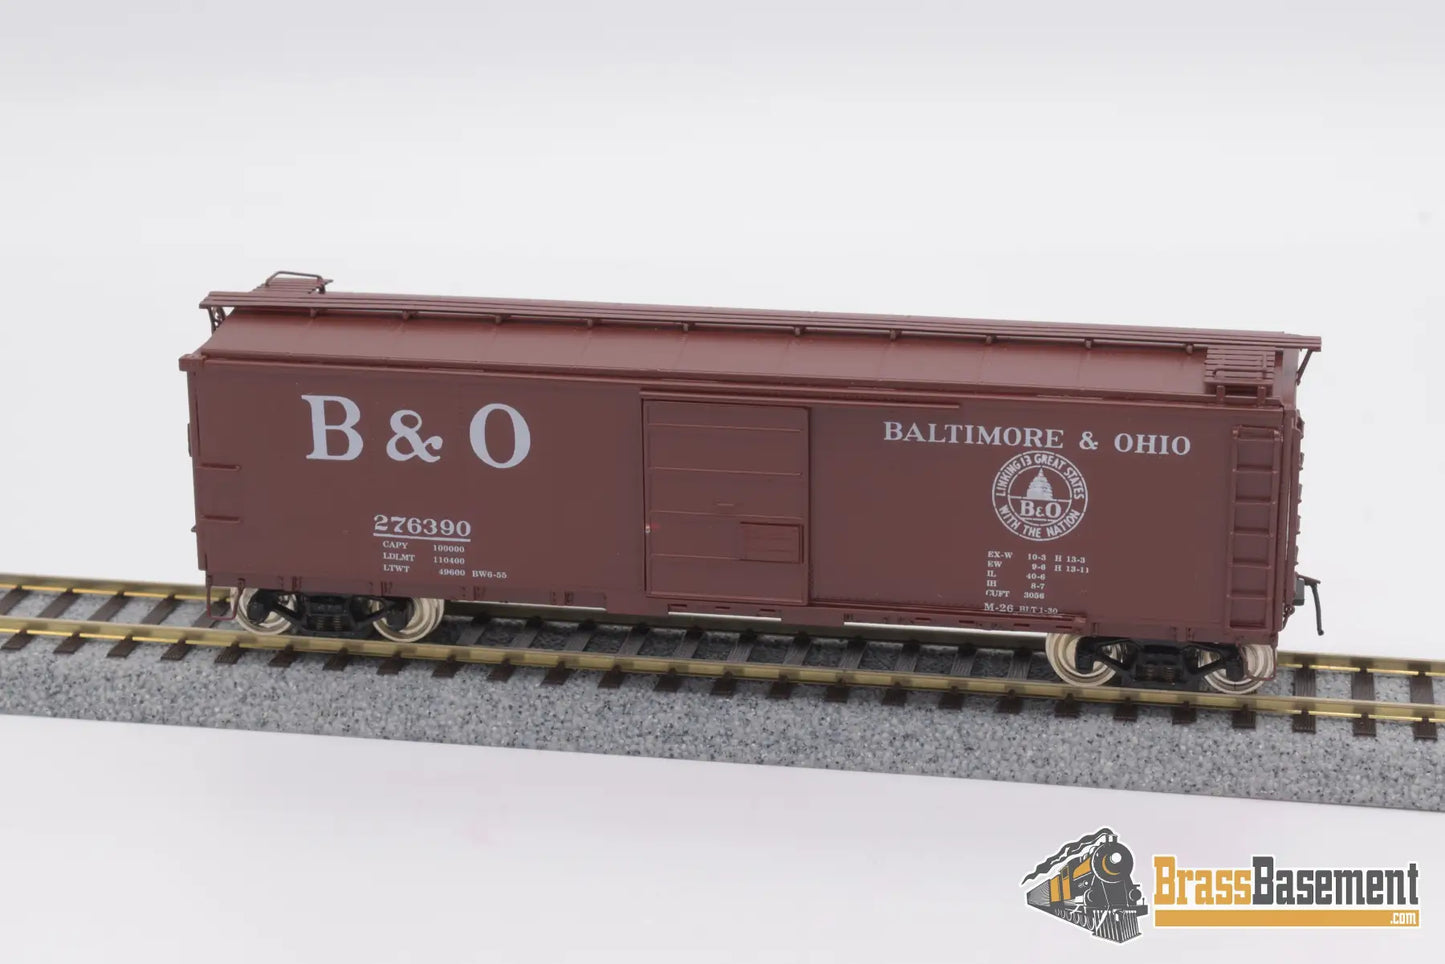 Ho Brass - Psc 16032 - 1 Baltimore & Ohio M - 26 Boxcar F/P Freight